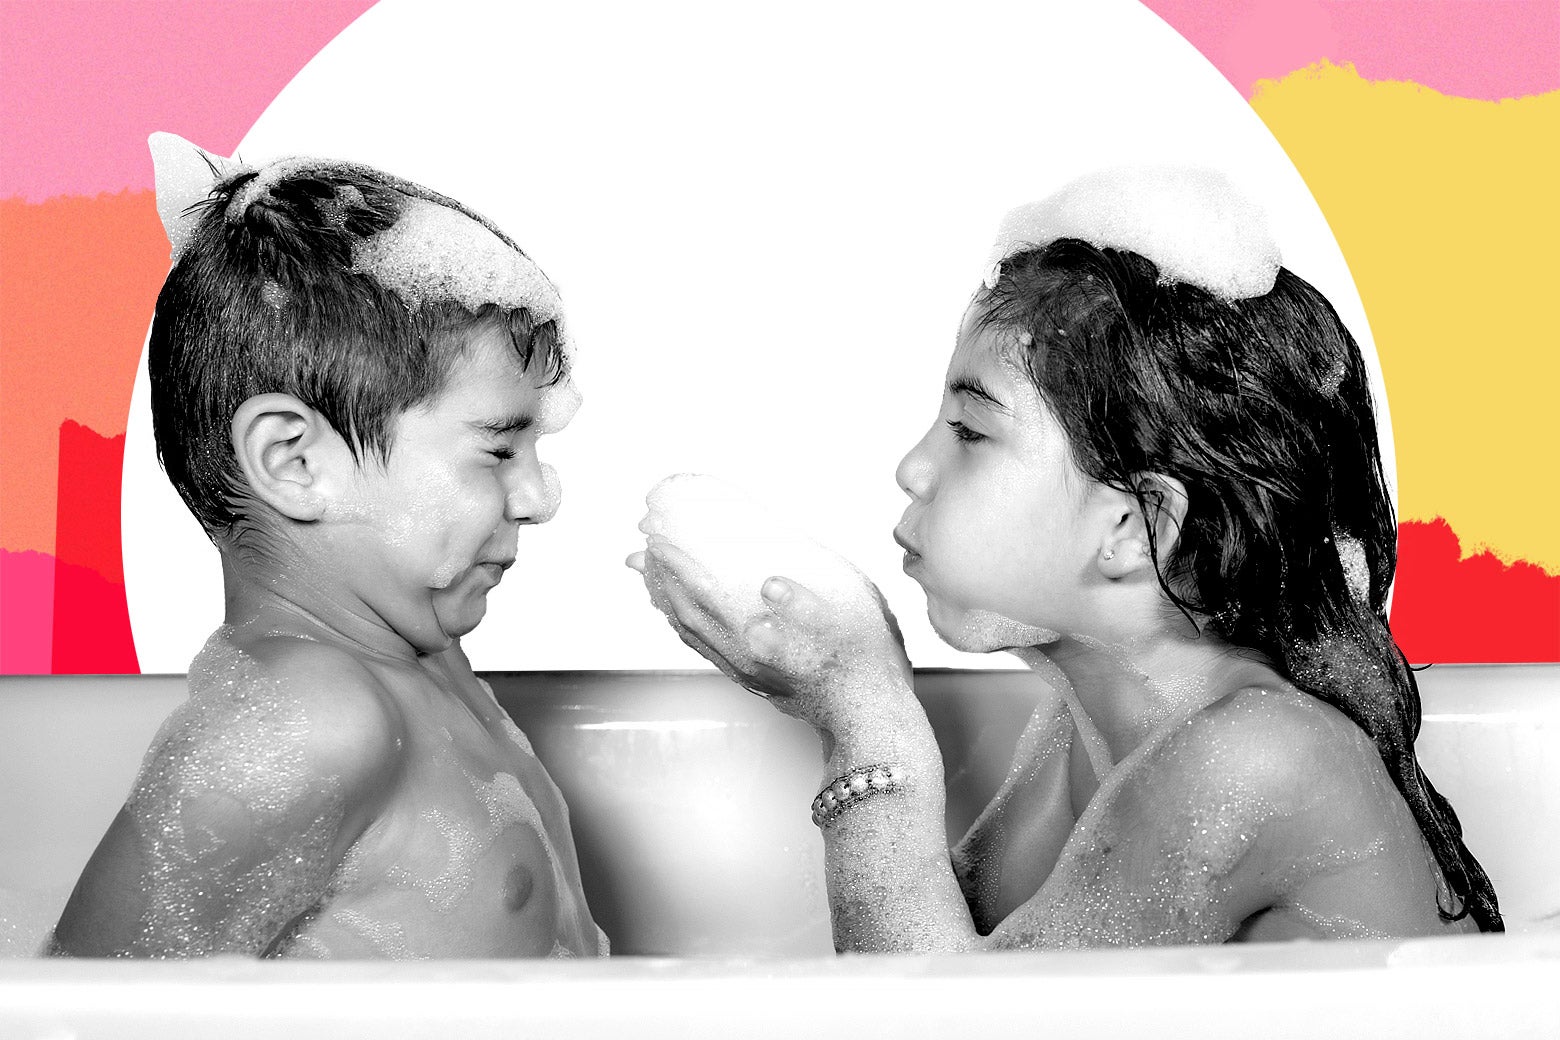 Two children sit in a bathtub, and one blows bubbles at the other.